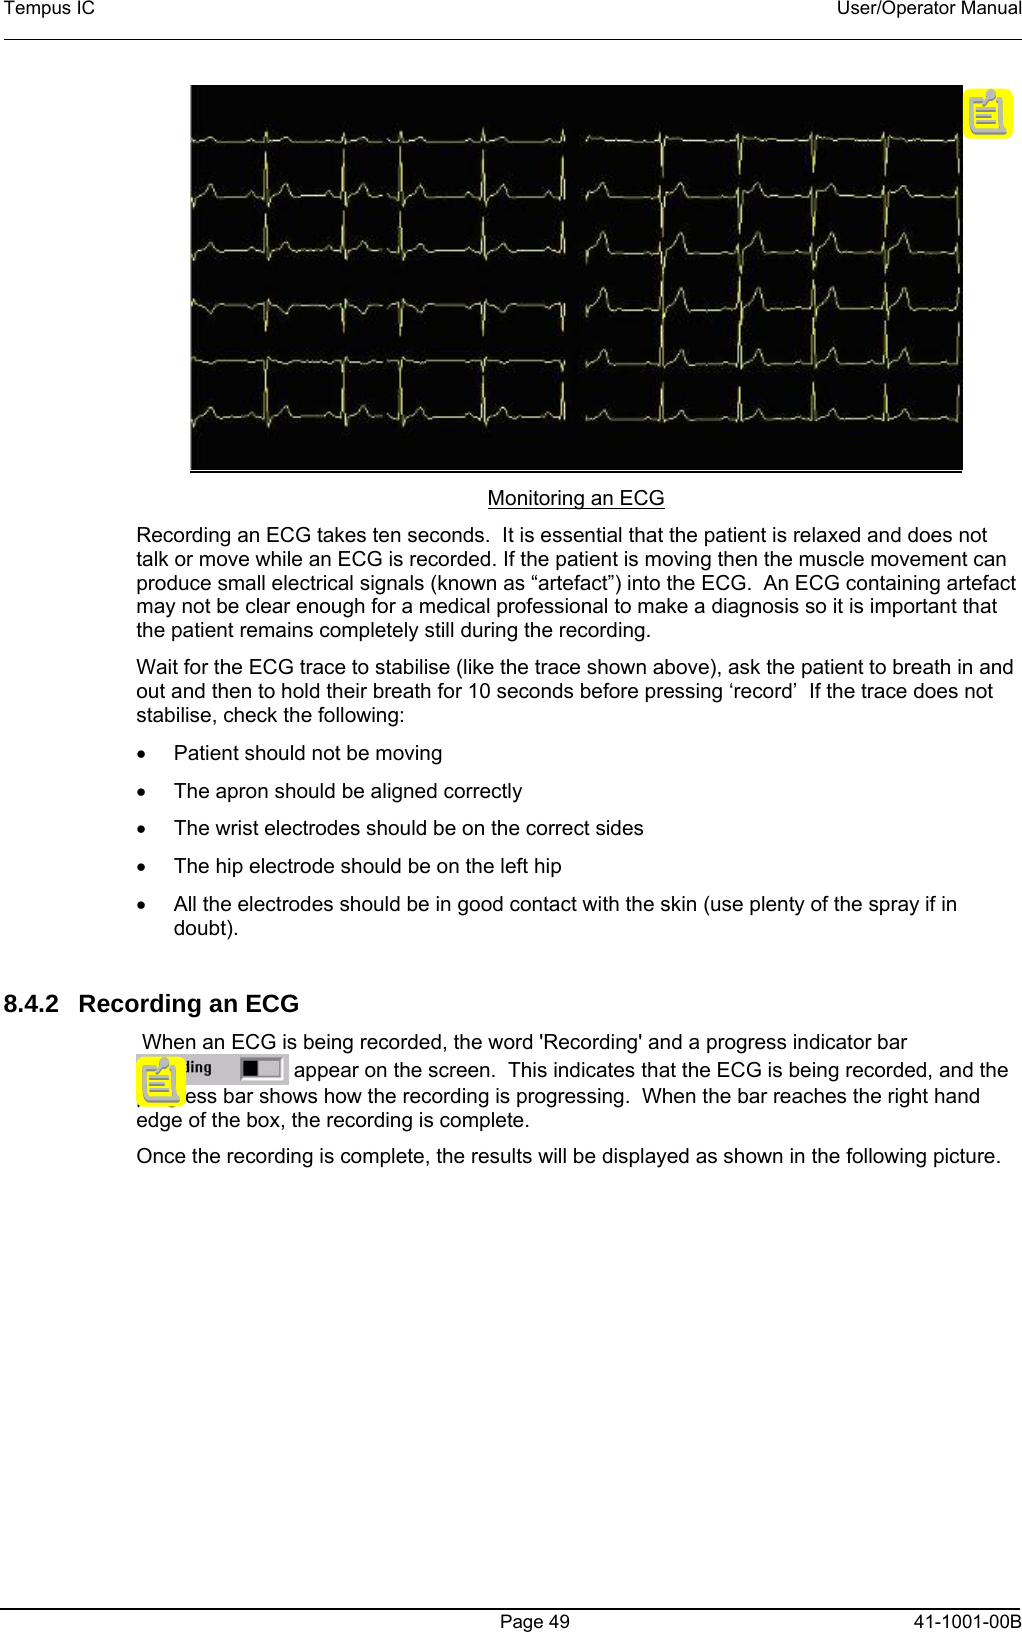 Tempus IC    User/Operator Manual     Monitoring an ECG Recording an ECG takes ten seconds.  It is essential that the patient is relaxed and does not talk or move while an ECG is recorded. If the patient is moving then the muscle movement can produce small electrical signals (known as “artefact”) into the ECG.  An ECG containing artefact may not be clear enough for a medical professional to make a diagnosis so it is important that the patient remains completely still during the recording. Wait for the ECG trace to stabilise (like the trace shown above), ask the patient to breath in and out and then to hold their breath for 10 seconds before pressing ‘record’  If the trace does not stabilise, check the following: •  Patient should not be moving •  The apron should be aligned correctly •  The wrist electrodes should be on the correct sides •  The hip electrode should be on the left hip •  All the electrodes should be in good contact with the skin (use plenty of the spray if in doubt).  8.4.2  Recording an ECG  When an ECG is being recorded, the word &apos;Recording&apos; and a progress indicator bar  appear on the screen.  This indicates that the ECG is being recorded, and the progress bar shows how the recording is progressing.  When the bar reaches the right hand edge of the box, the recording is complete.  Once the recording is complete, the results will be displayed as shown in the following picture.     Page 49   41-1001-00B 